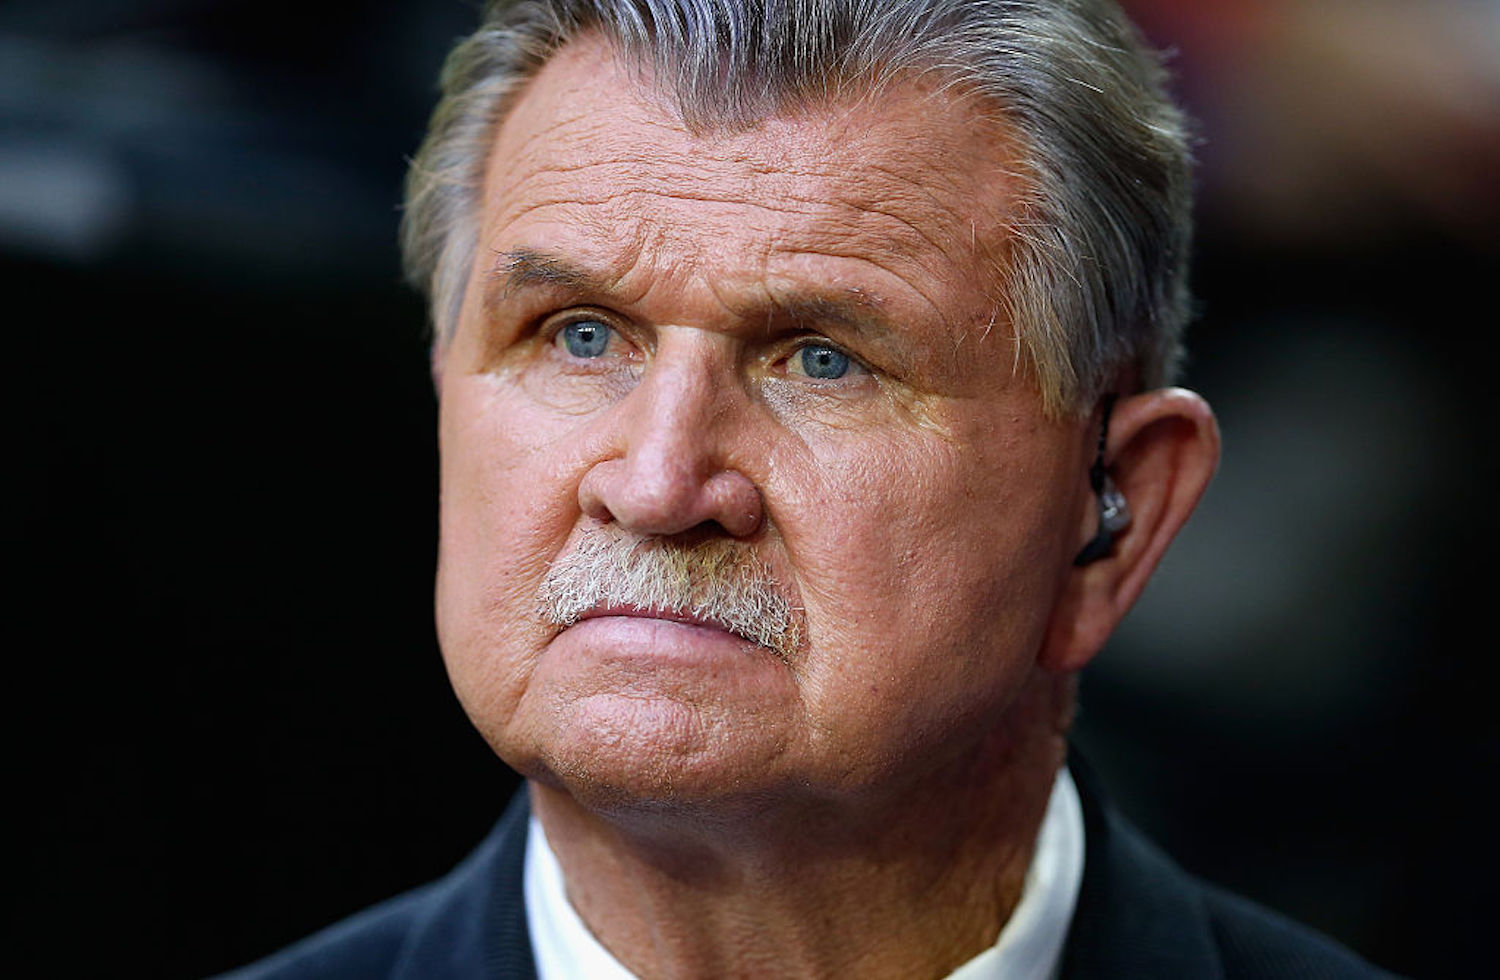 Mike Ditka found himself in hot water for controversial comments on the national anthem protests, and now powerful NFL figures are piling on.